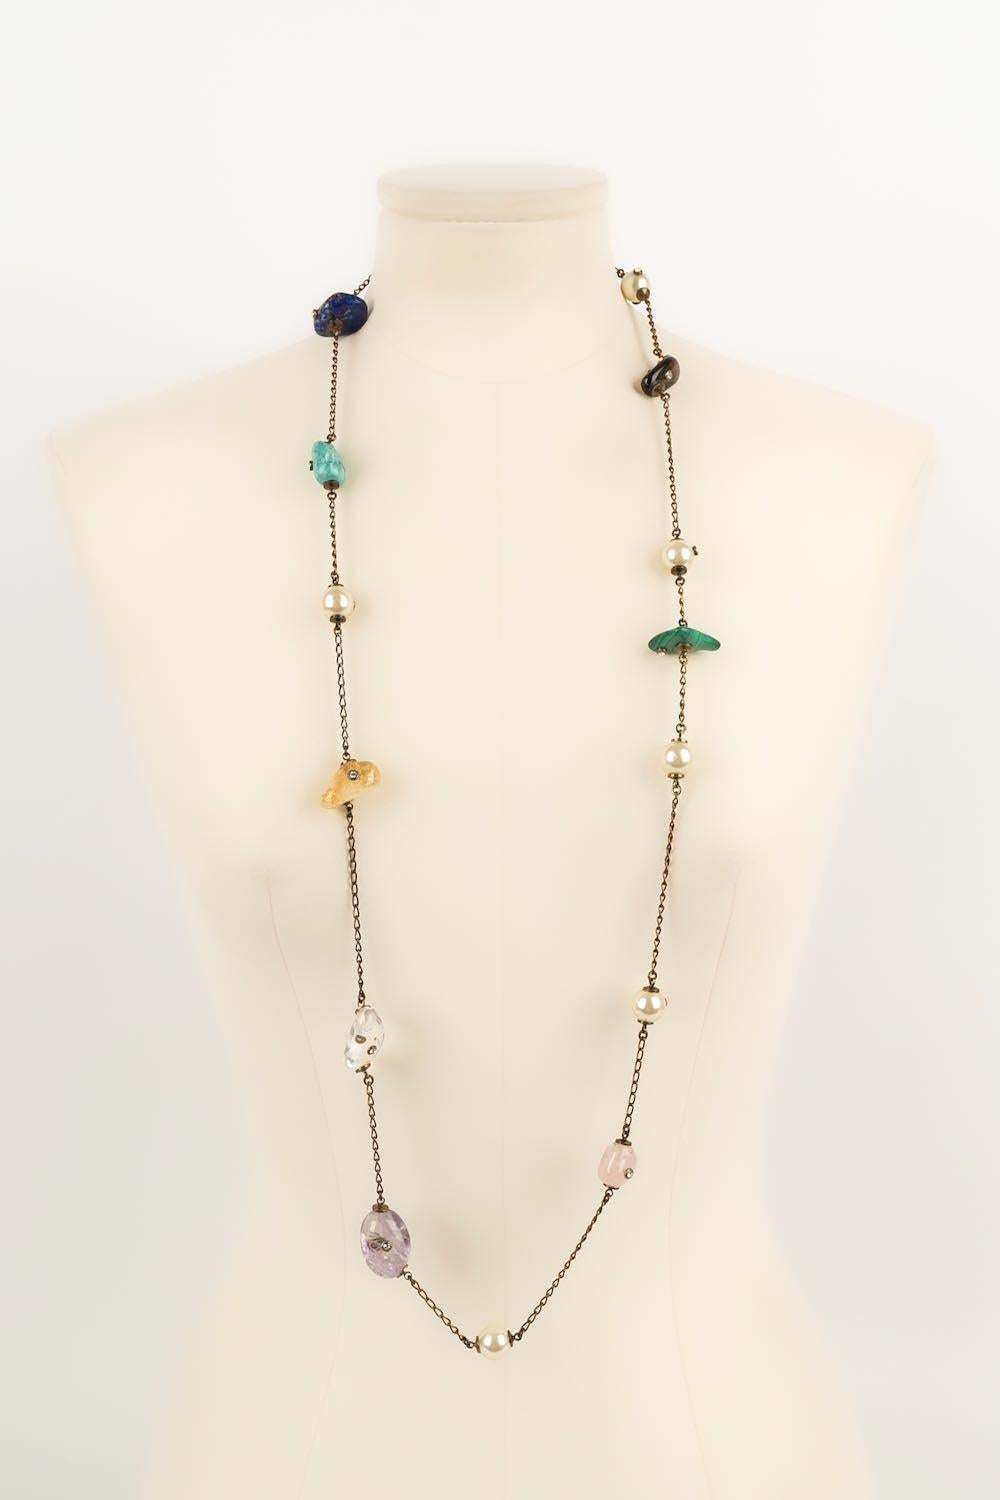 Chanel - (Made in France) Long necklace in copper-plated metal and hard stone beads topped with rhinestones. Fall-Winter 1997 collection.

Additional information:
Dimensions: Length : 103 cm
Condition: Very good condition
Seller Ref number: CB46